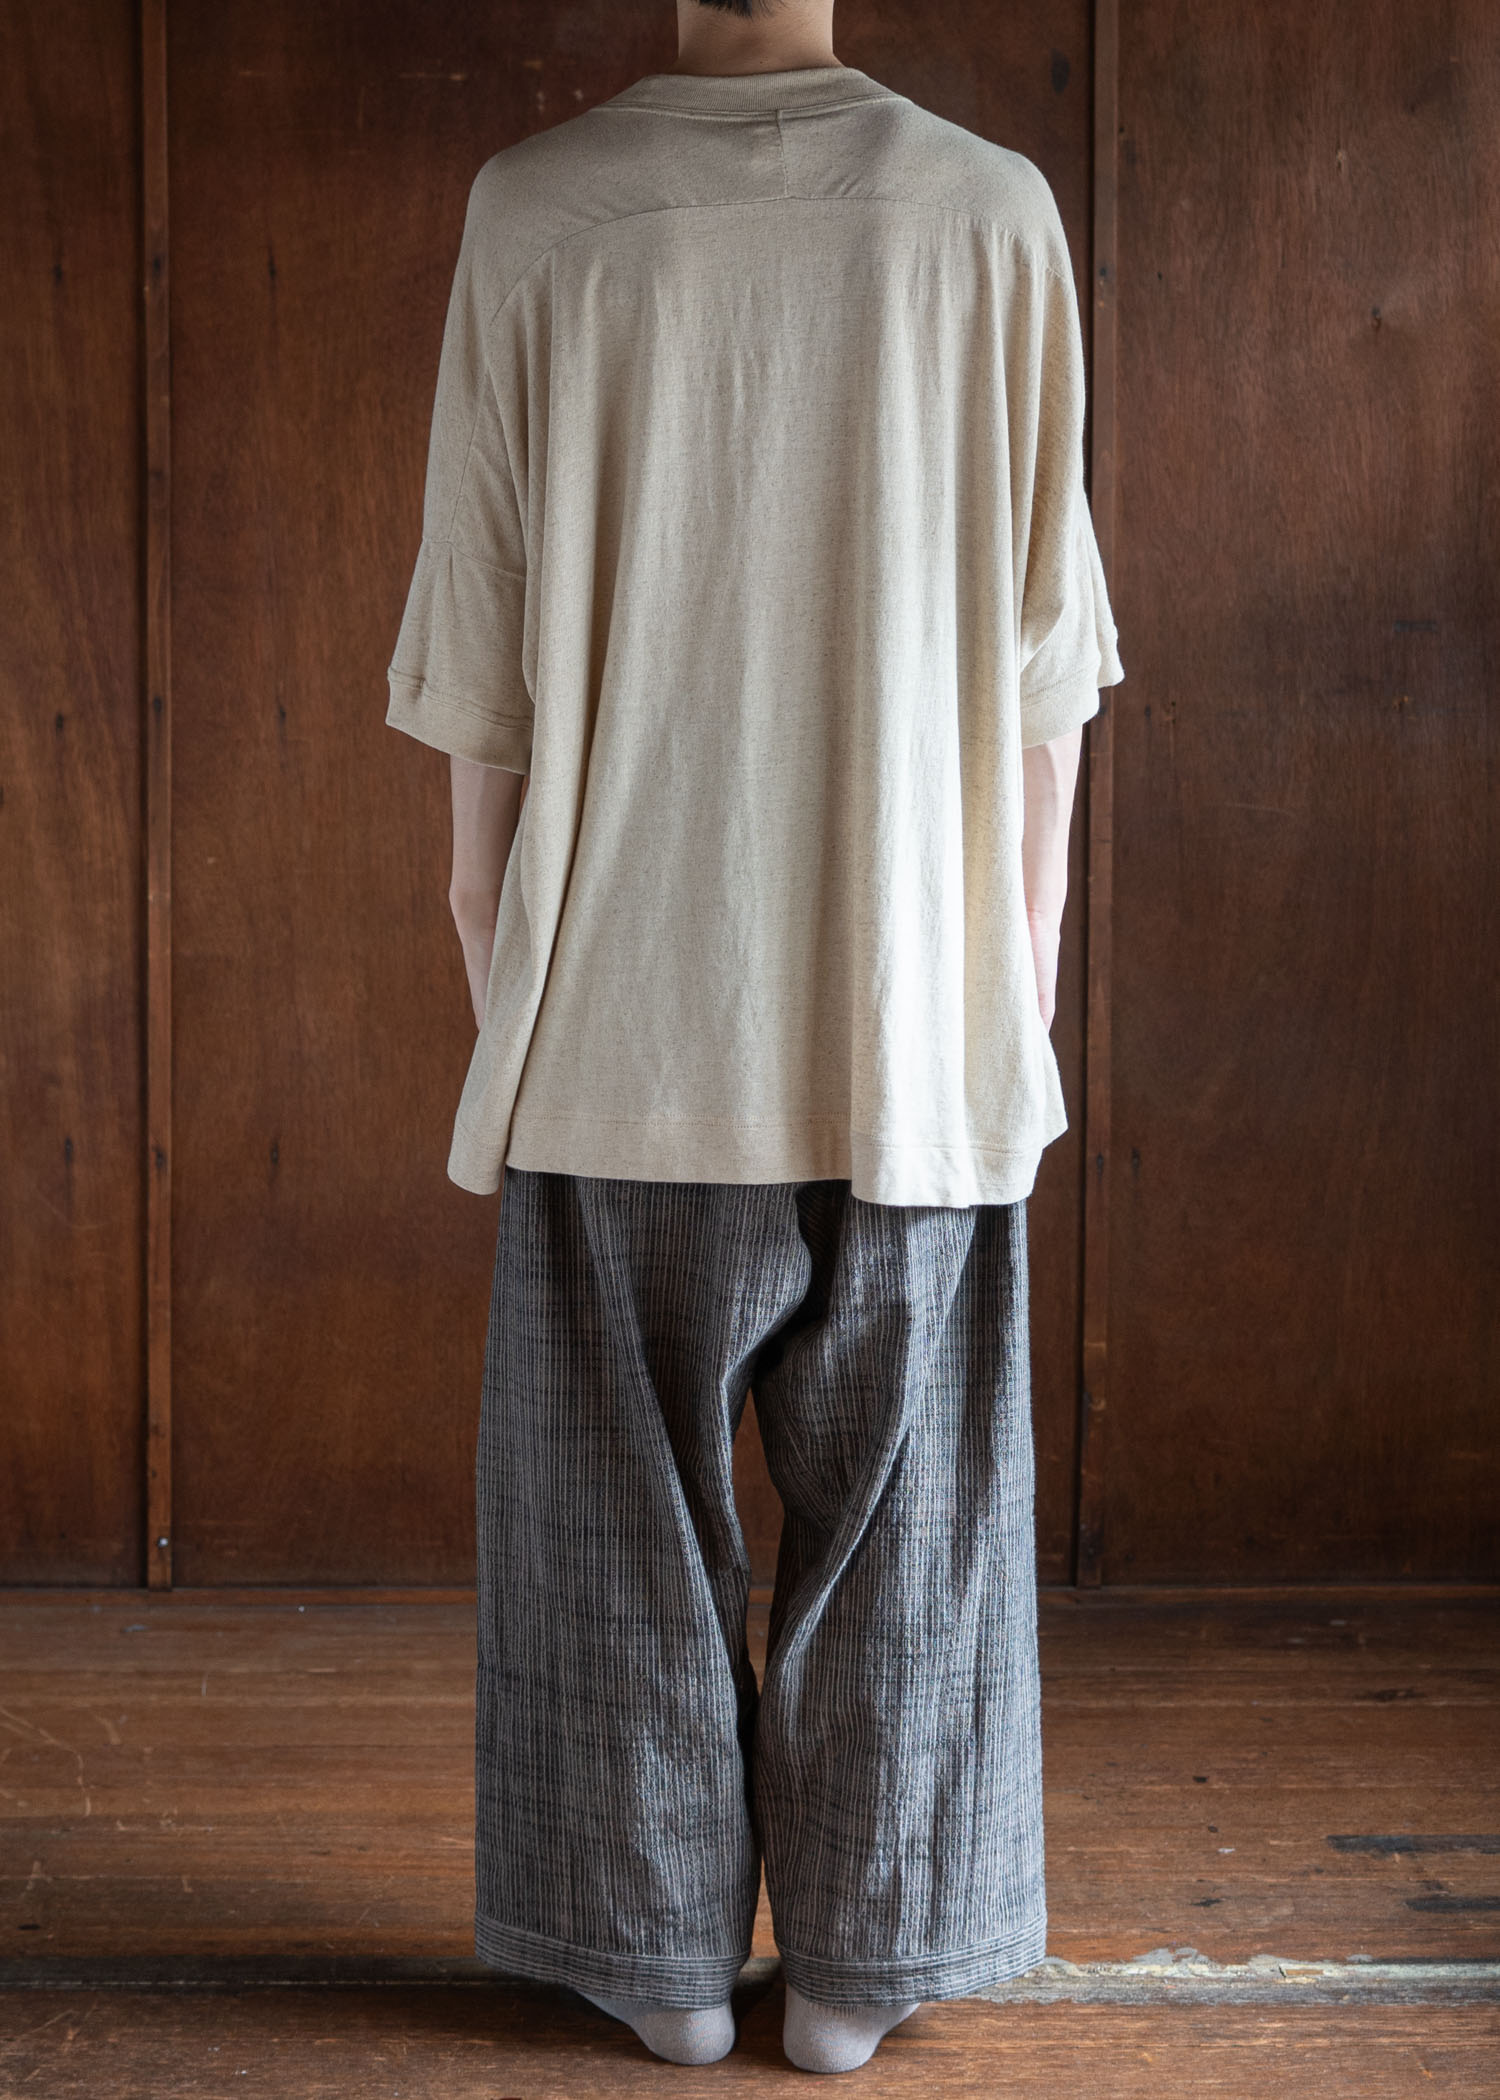 JAN-JAN VAN ESSCHE TROUSERS#80"" LOOSE FIT LOW CROTCH TROUSERS WITH ELASTIC WAISTBAND COTTON CLOTH VINTAGE STRIPED